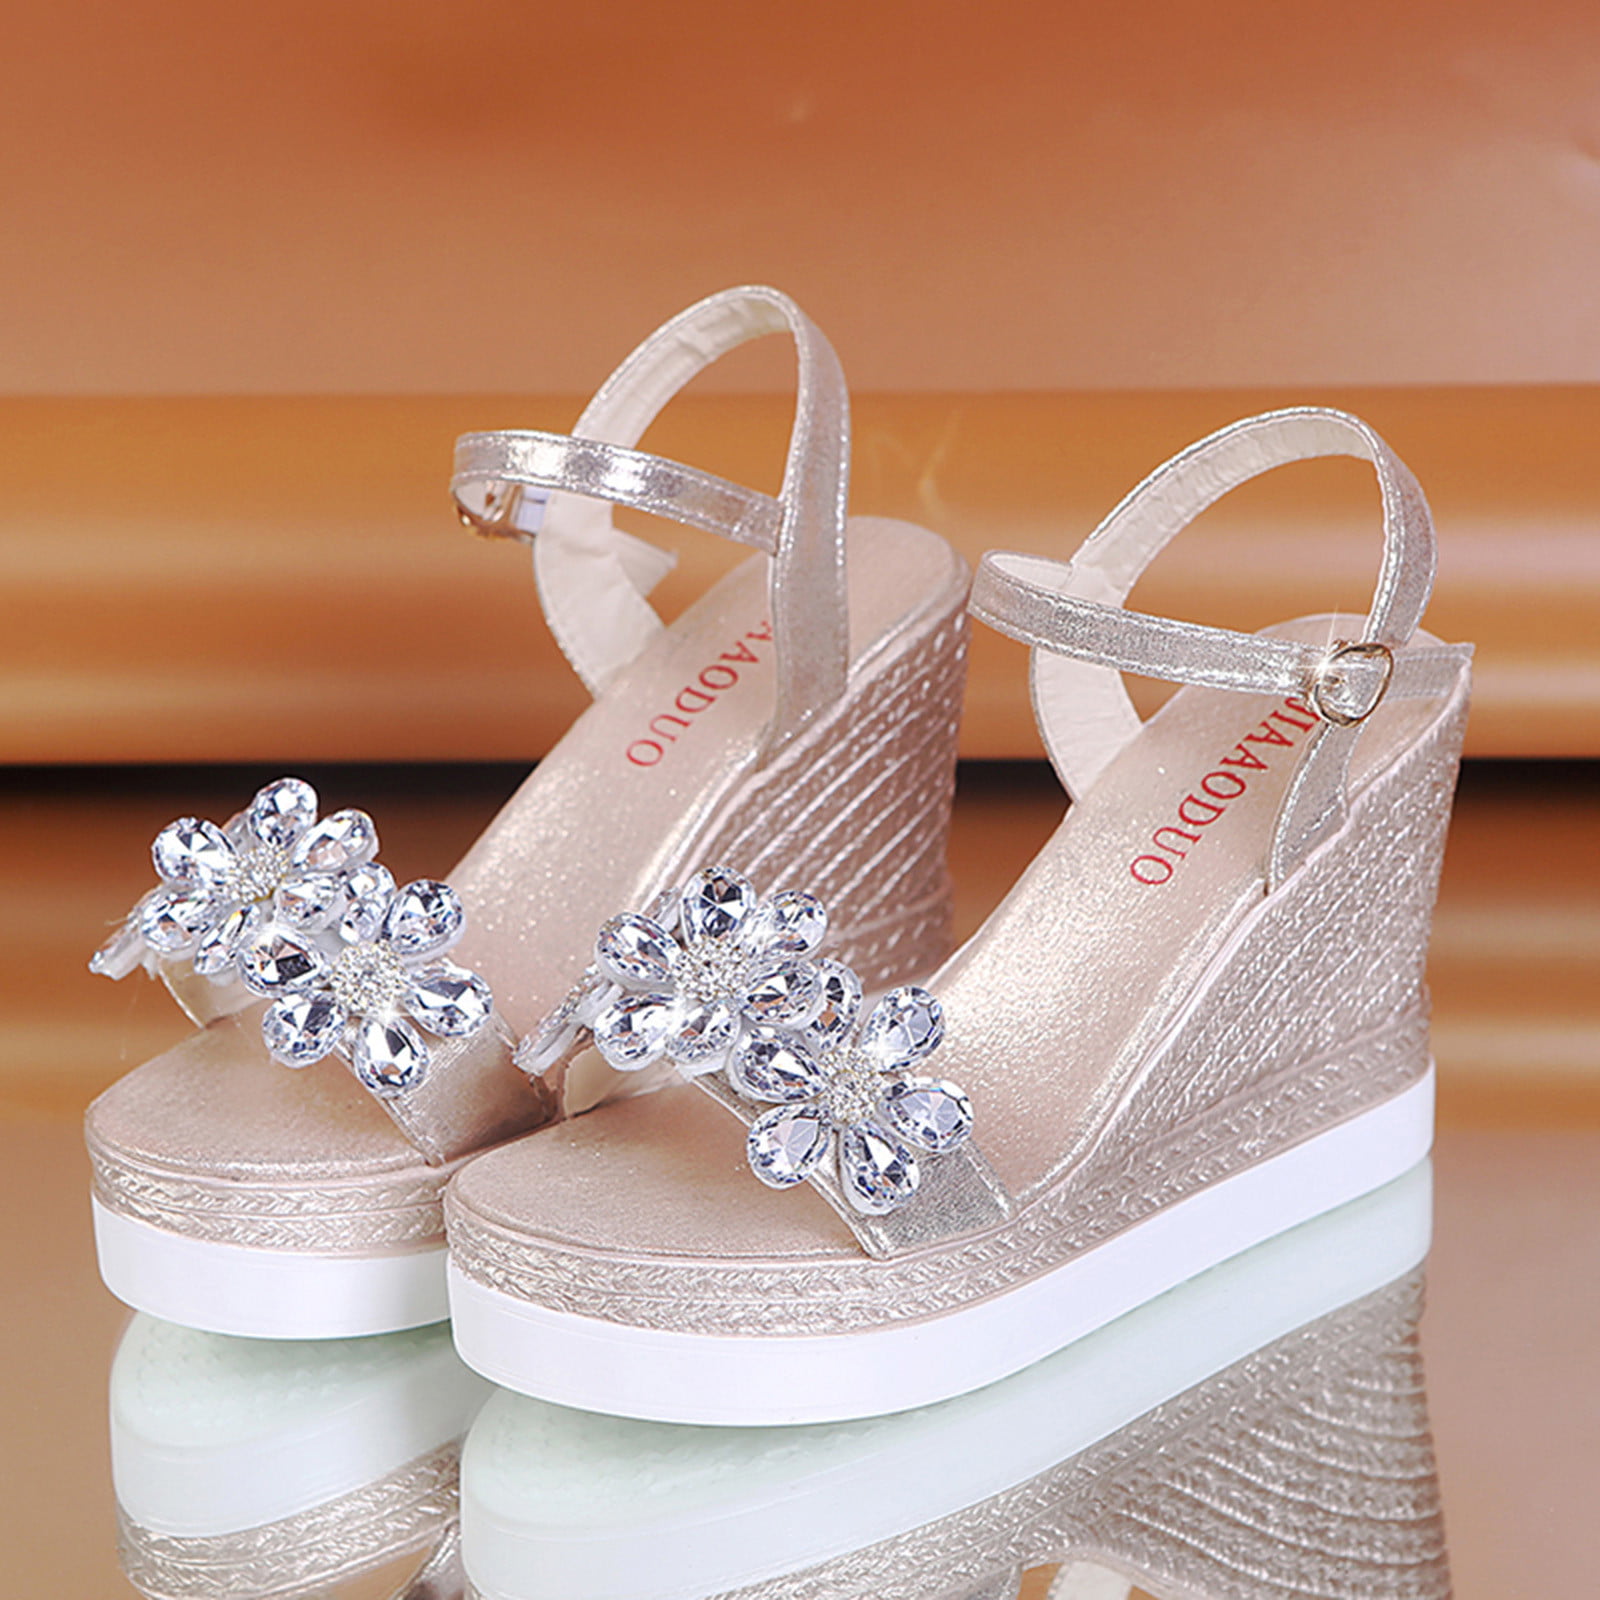 FLUENT in SILVER Wedge Sandals - OTBT shoes